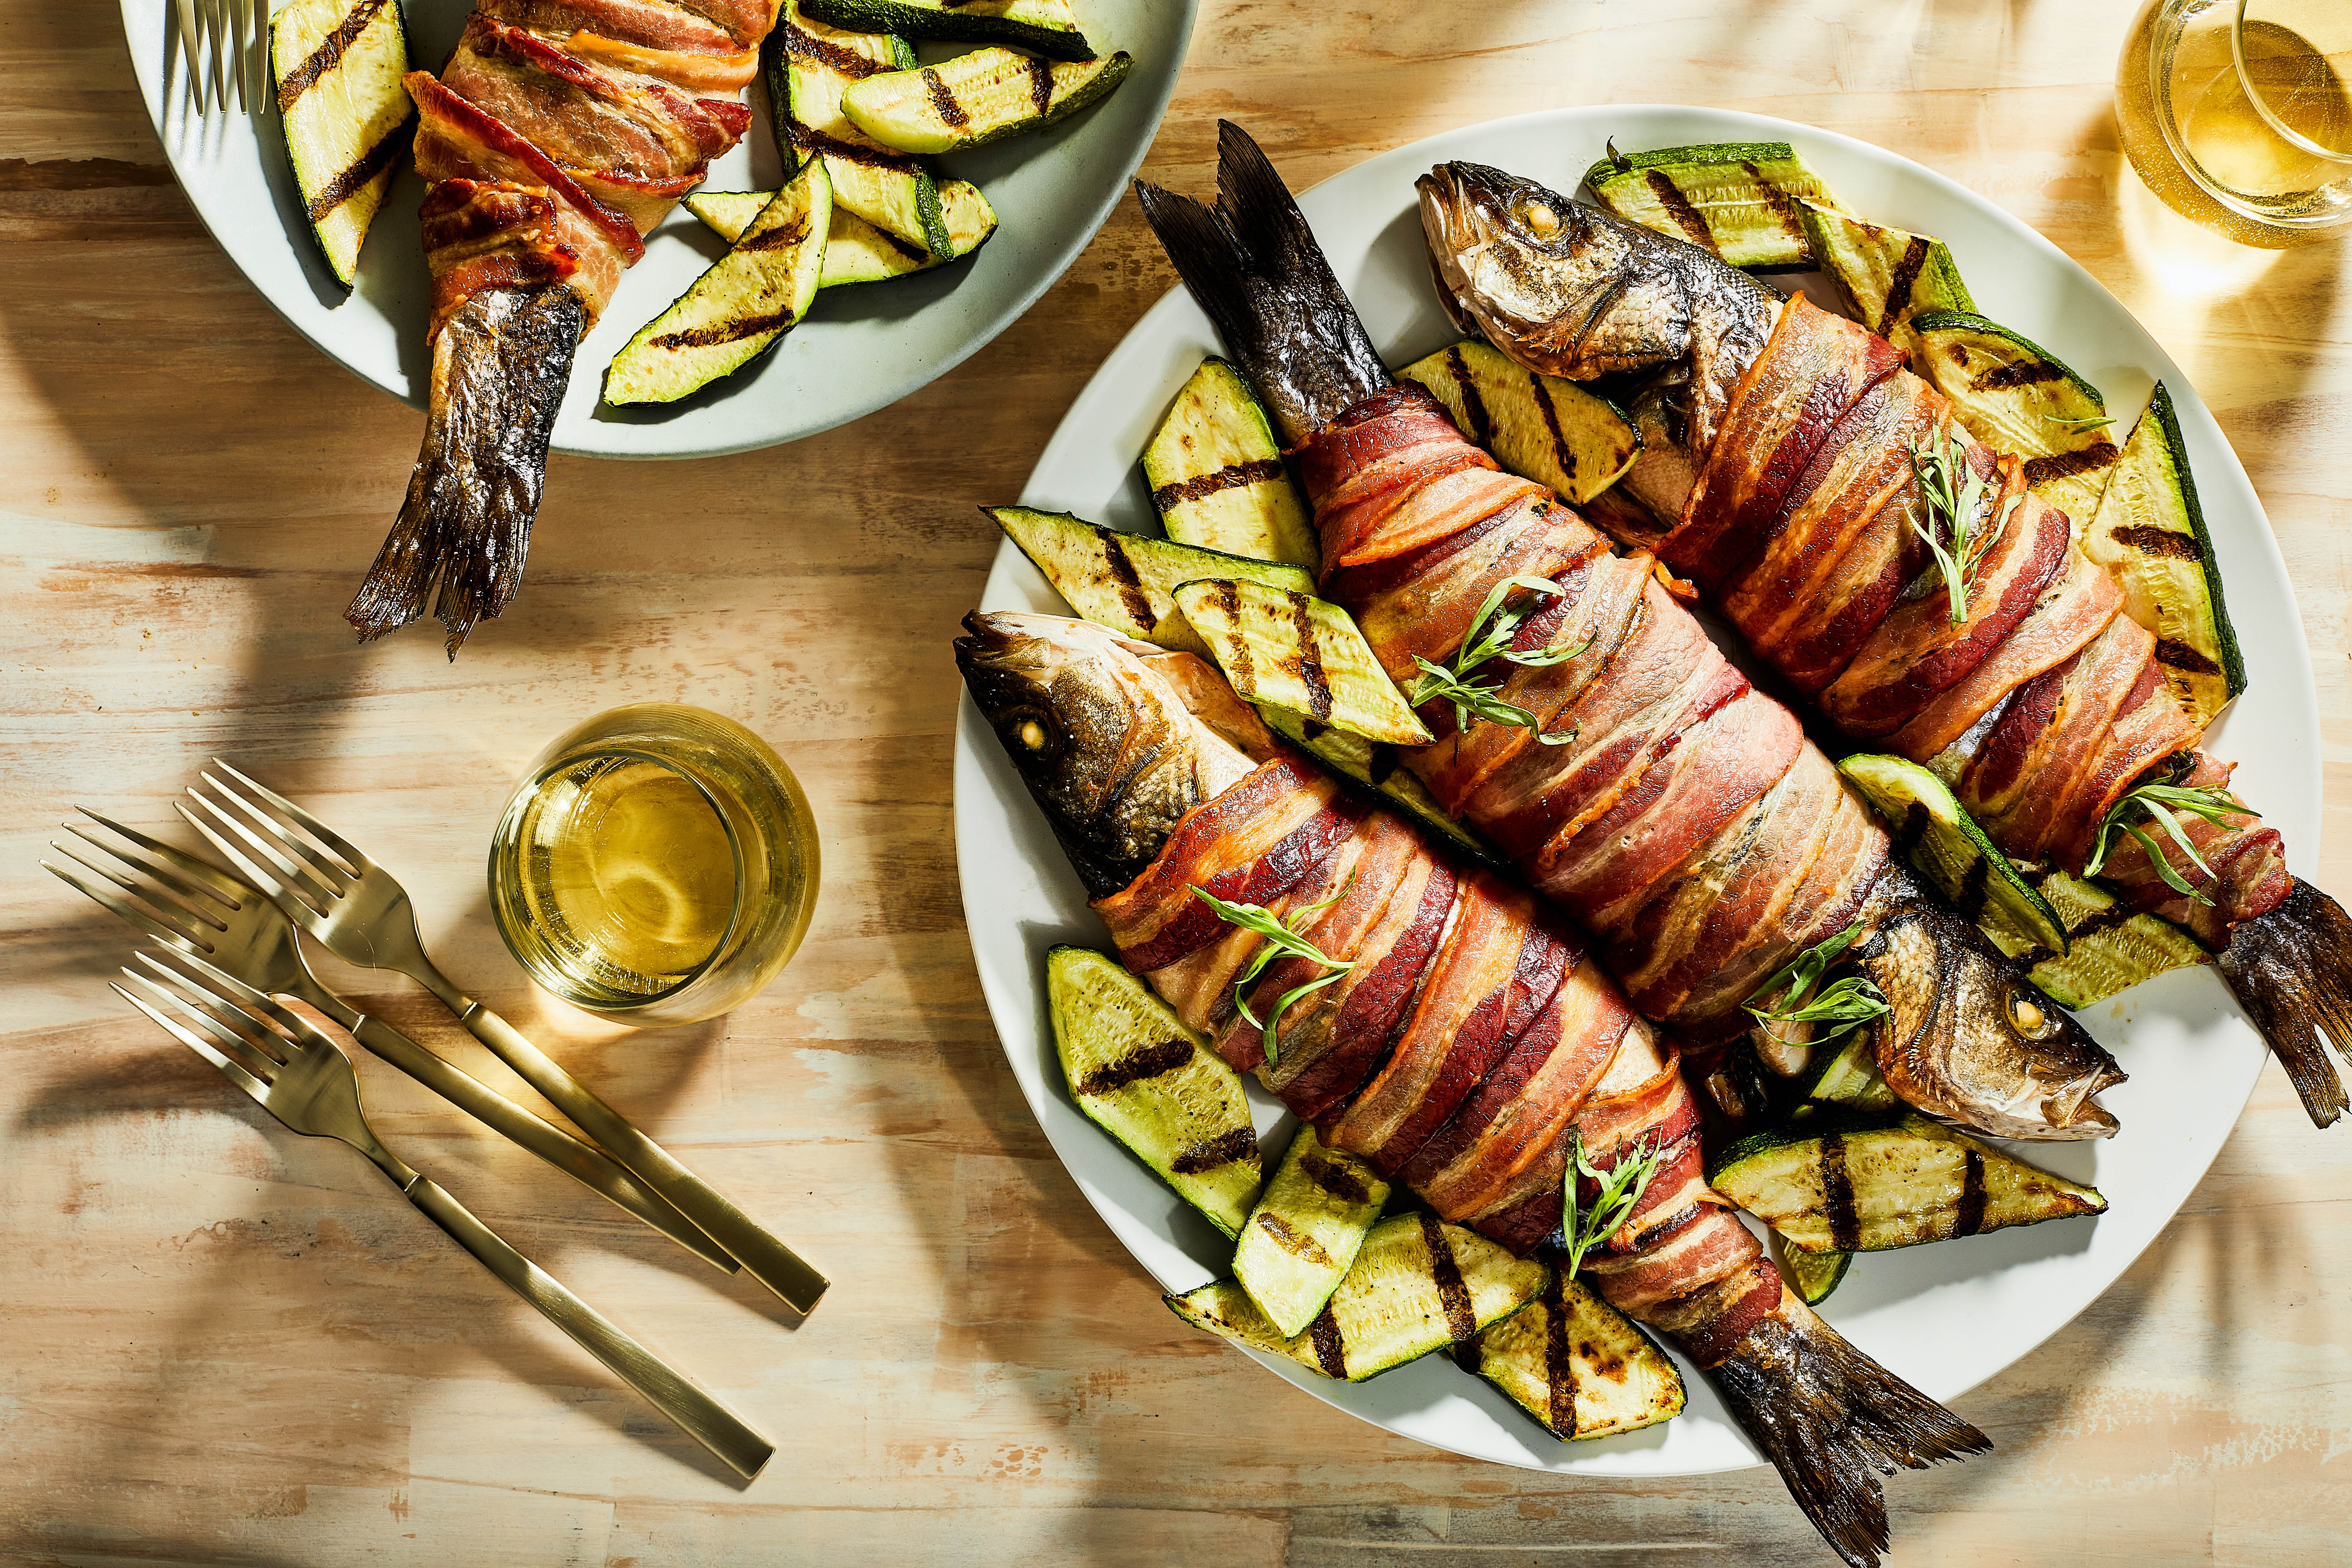 If you have trepidation about grilling whole fish, try this bacon-wrapped trout recipe